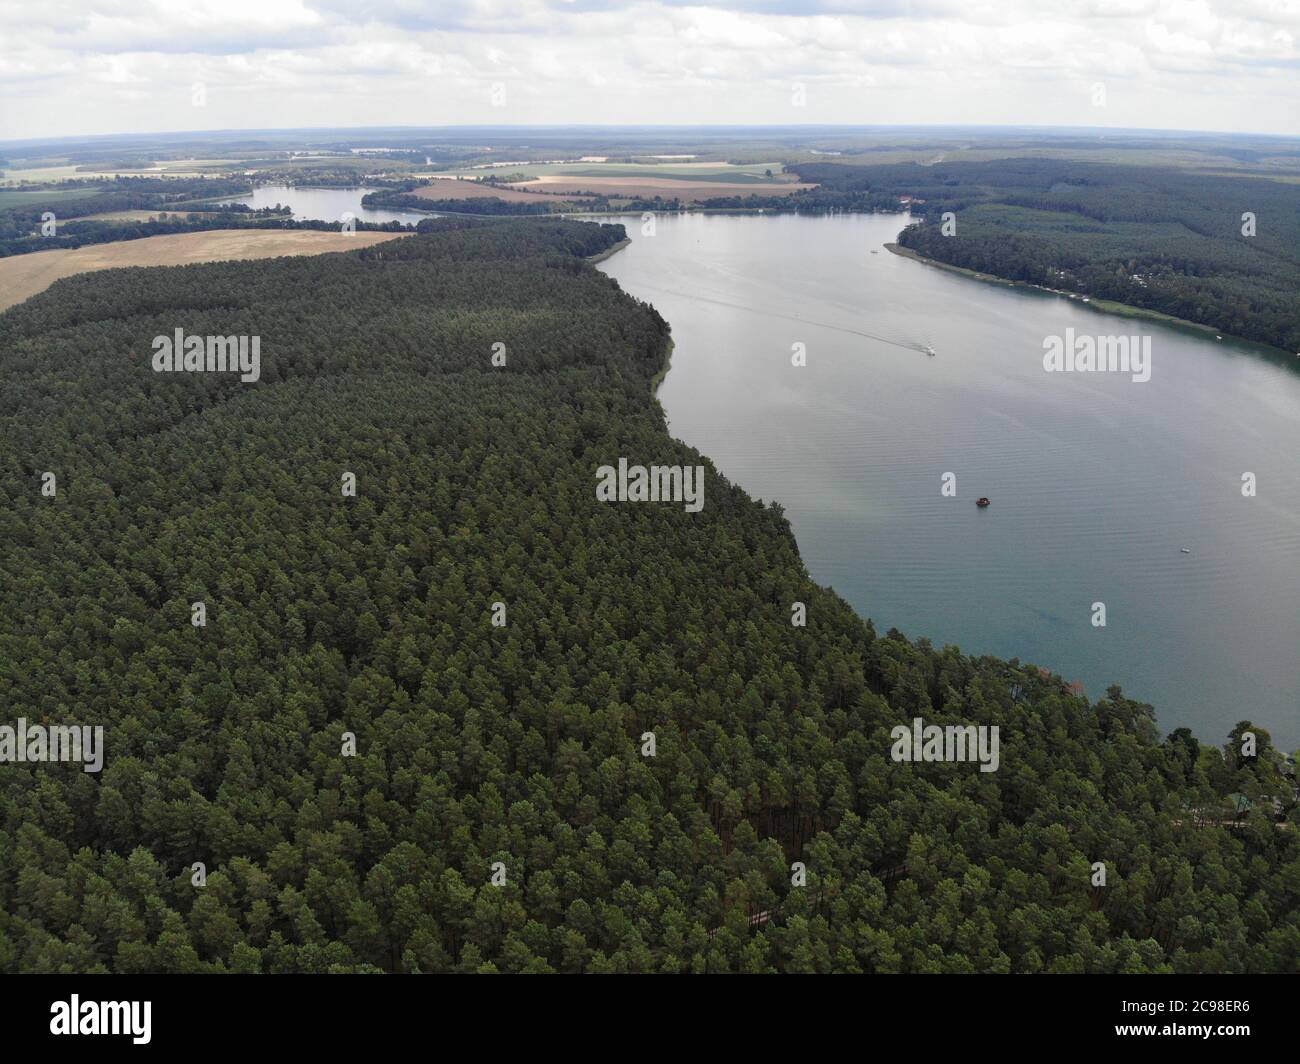 Aerial view of lake Großer Paelitzsee, Mecklenburg lake district, Germany Stock Photo